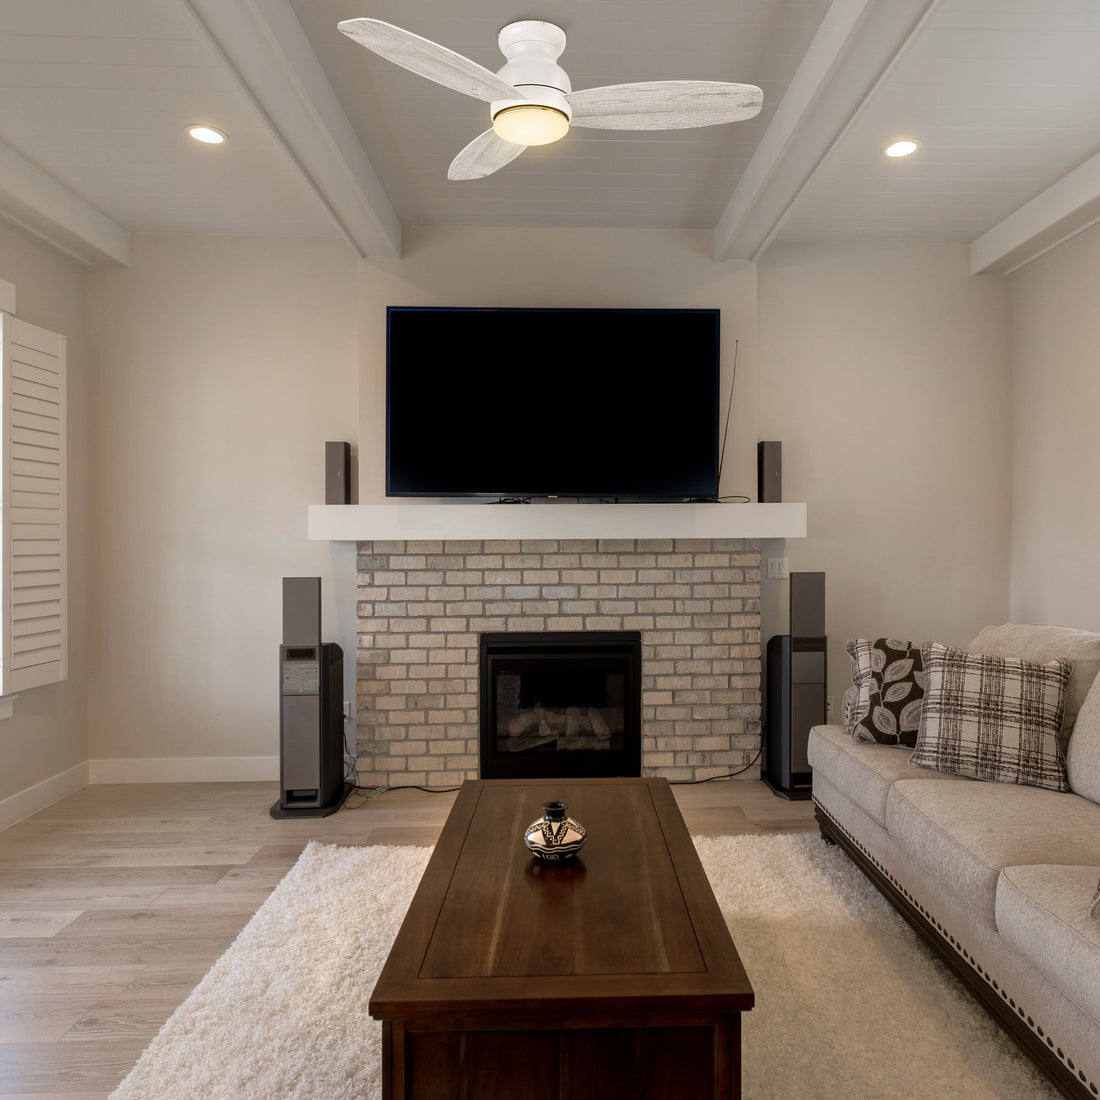 Create the home environment of your dreams with the versatile and powerful Arran 48 inches modern ceiling fan with lights! On the inside, The remote control ceiling fan features advanced motor and lighting technology for energy efficiency and precise control. 